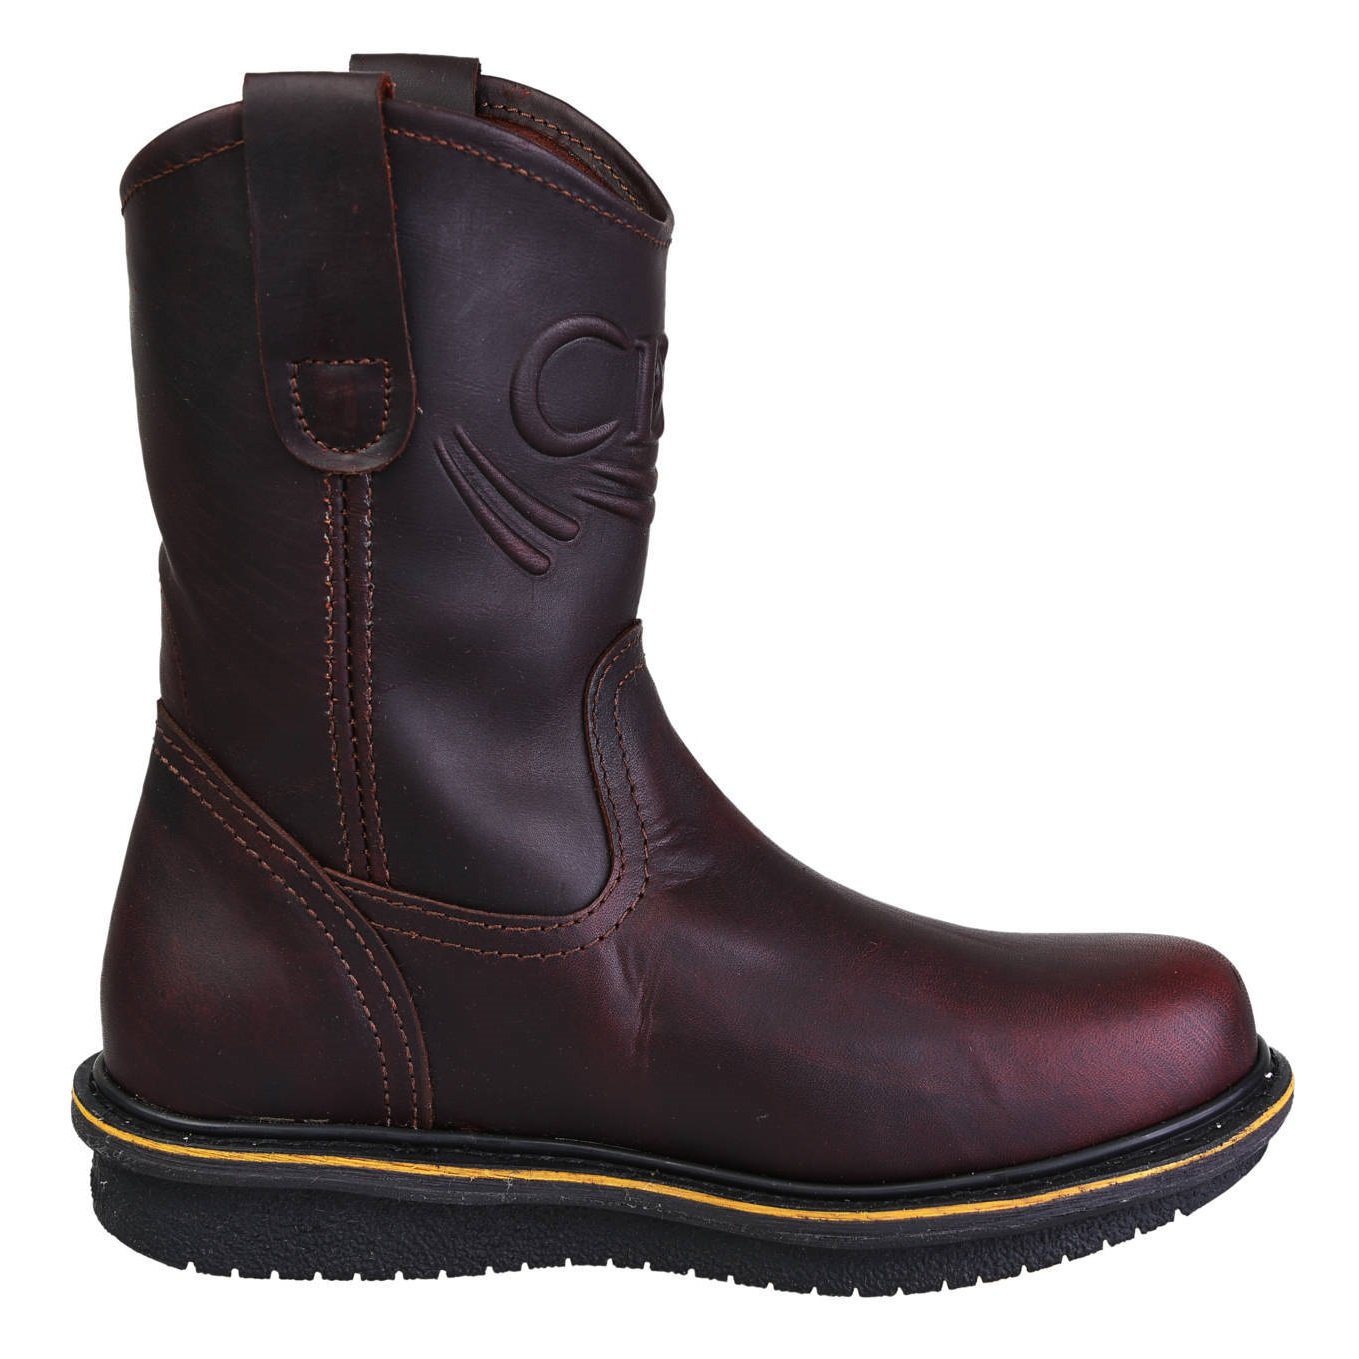 Men's Work Boots - Wedge Sole - Shedron Work Boots - Cebu - Pull On Work Boots - Shedron Wellington Work Boots